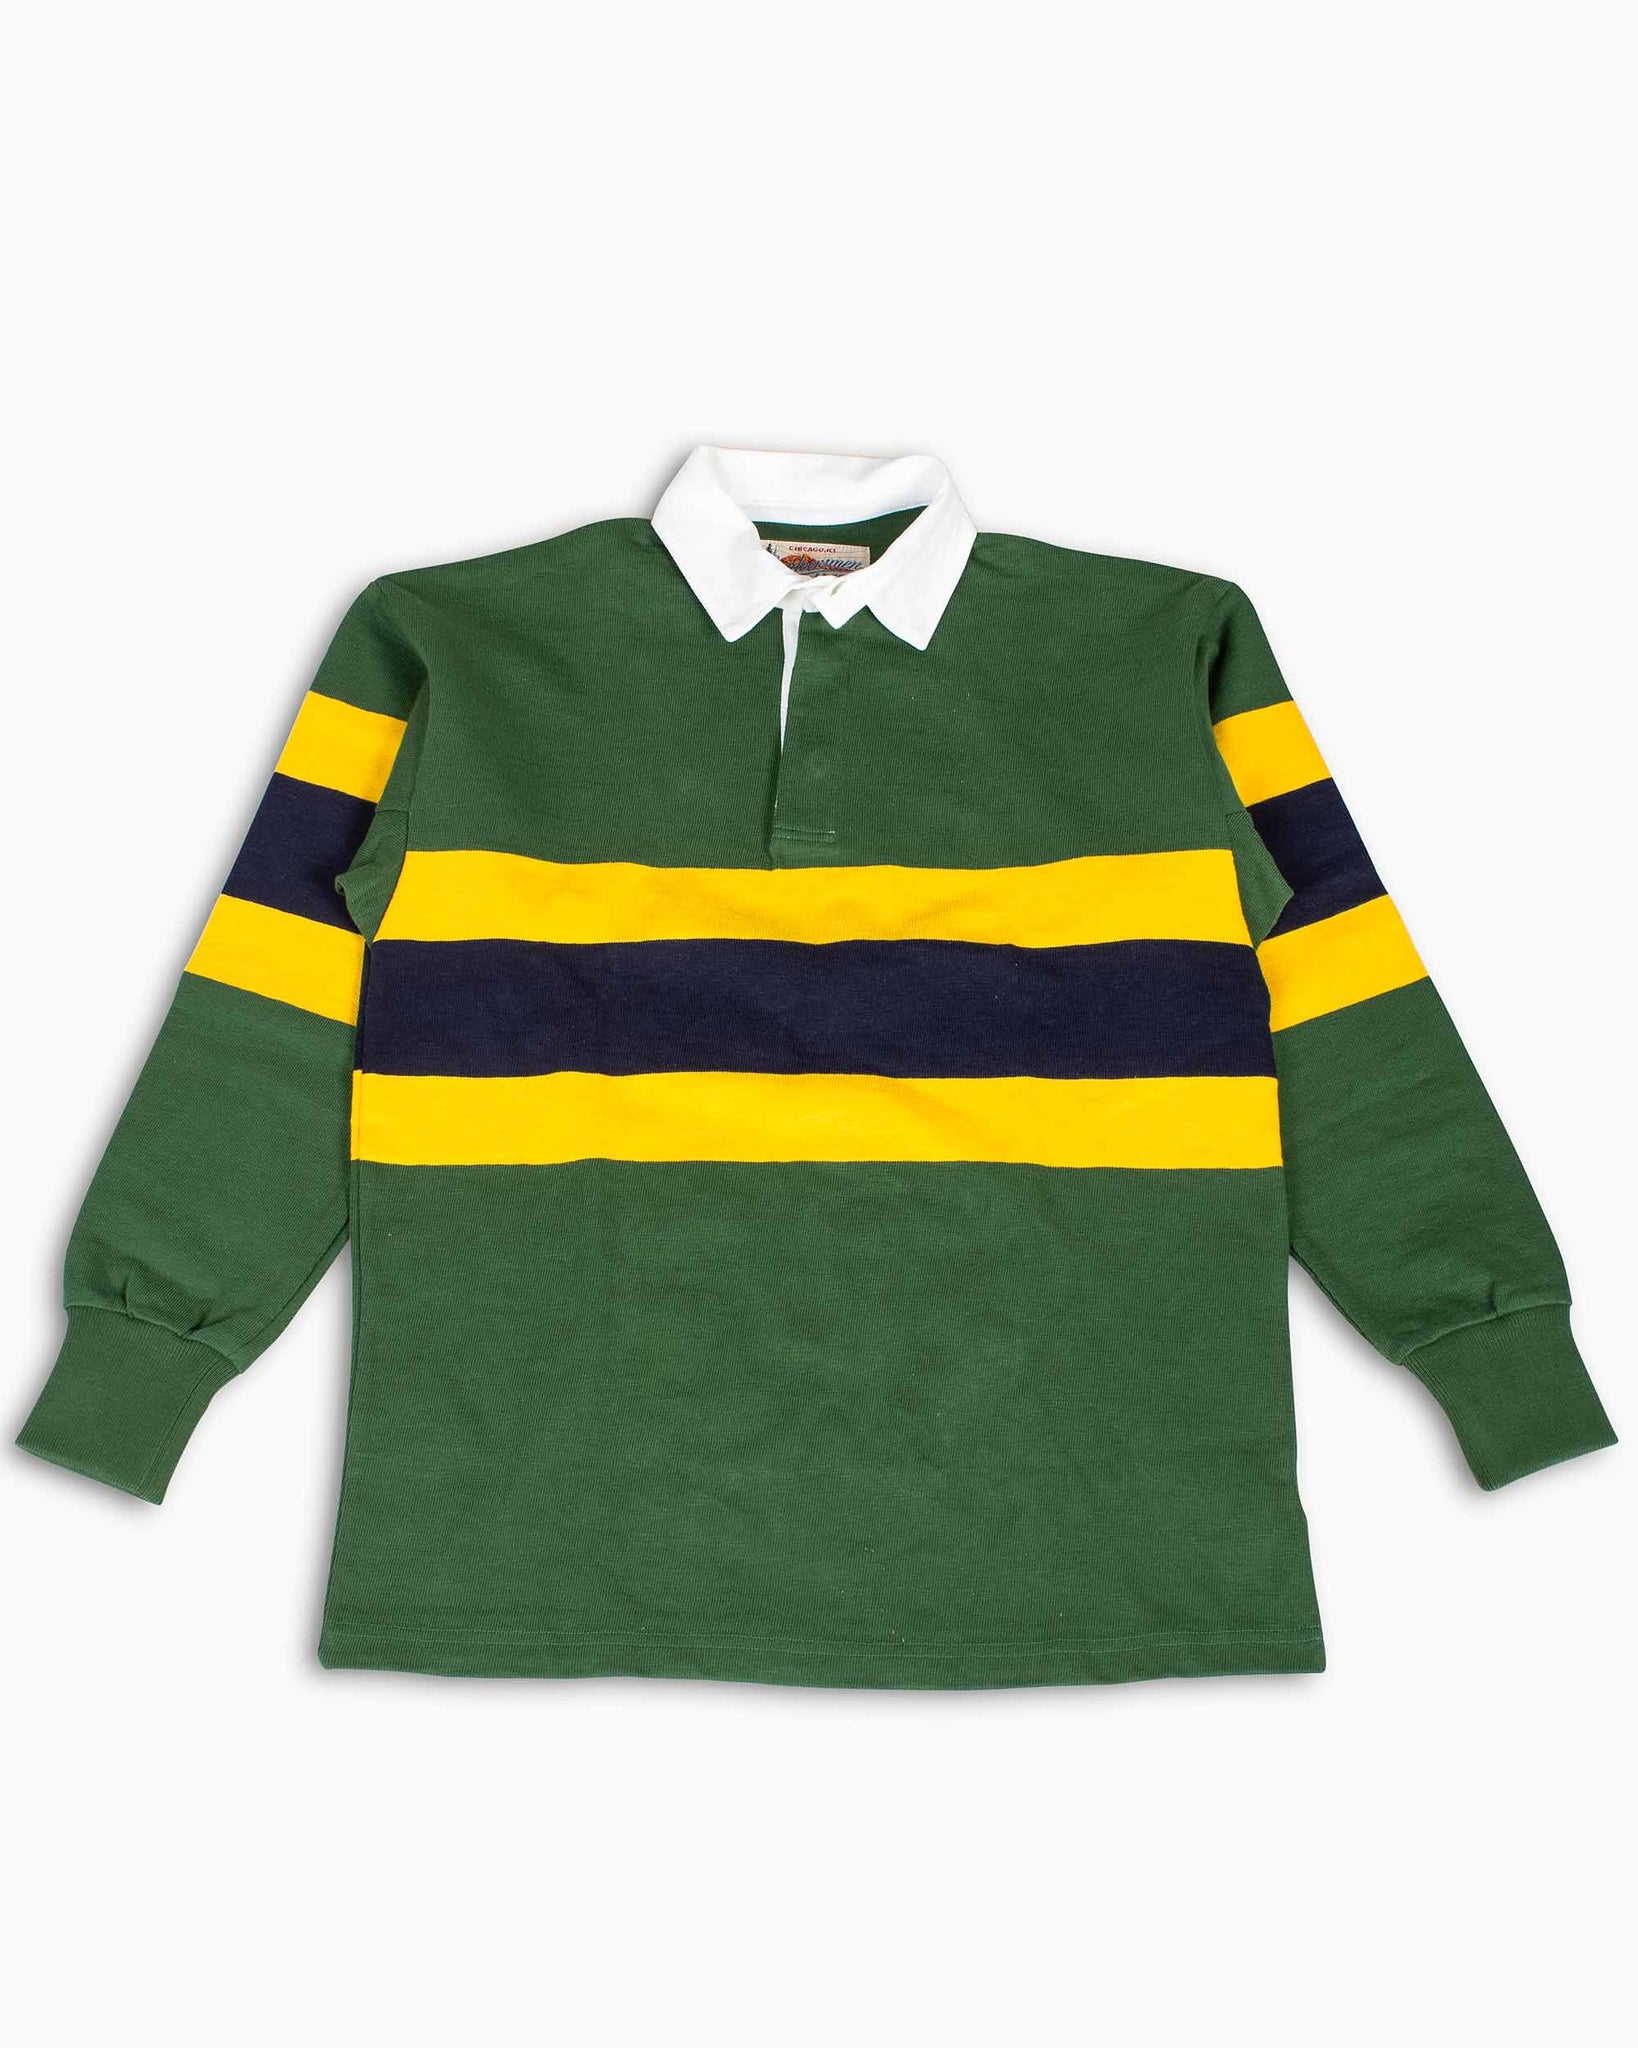 The Real McCoy's MC21021 Climbers' Striped Rugby Shirt Green